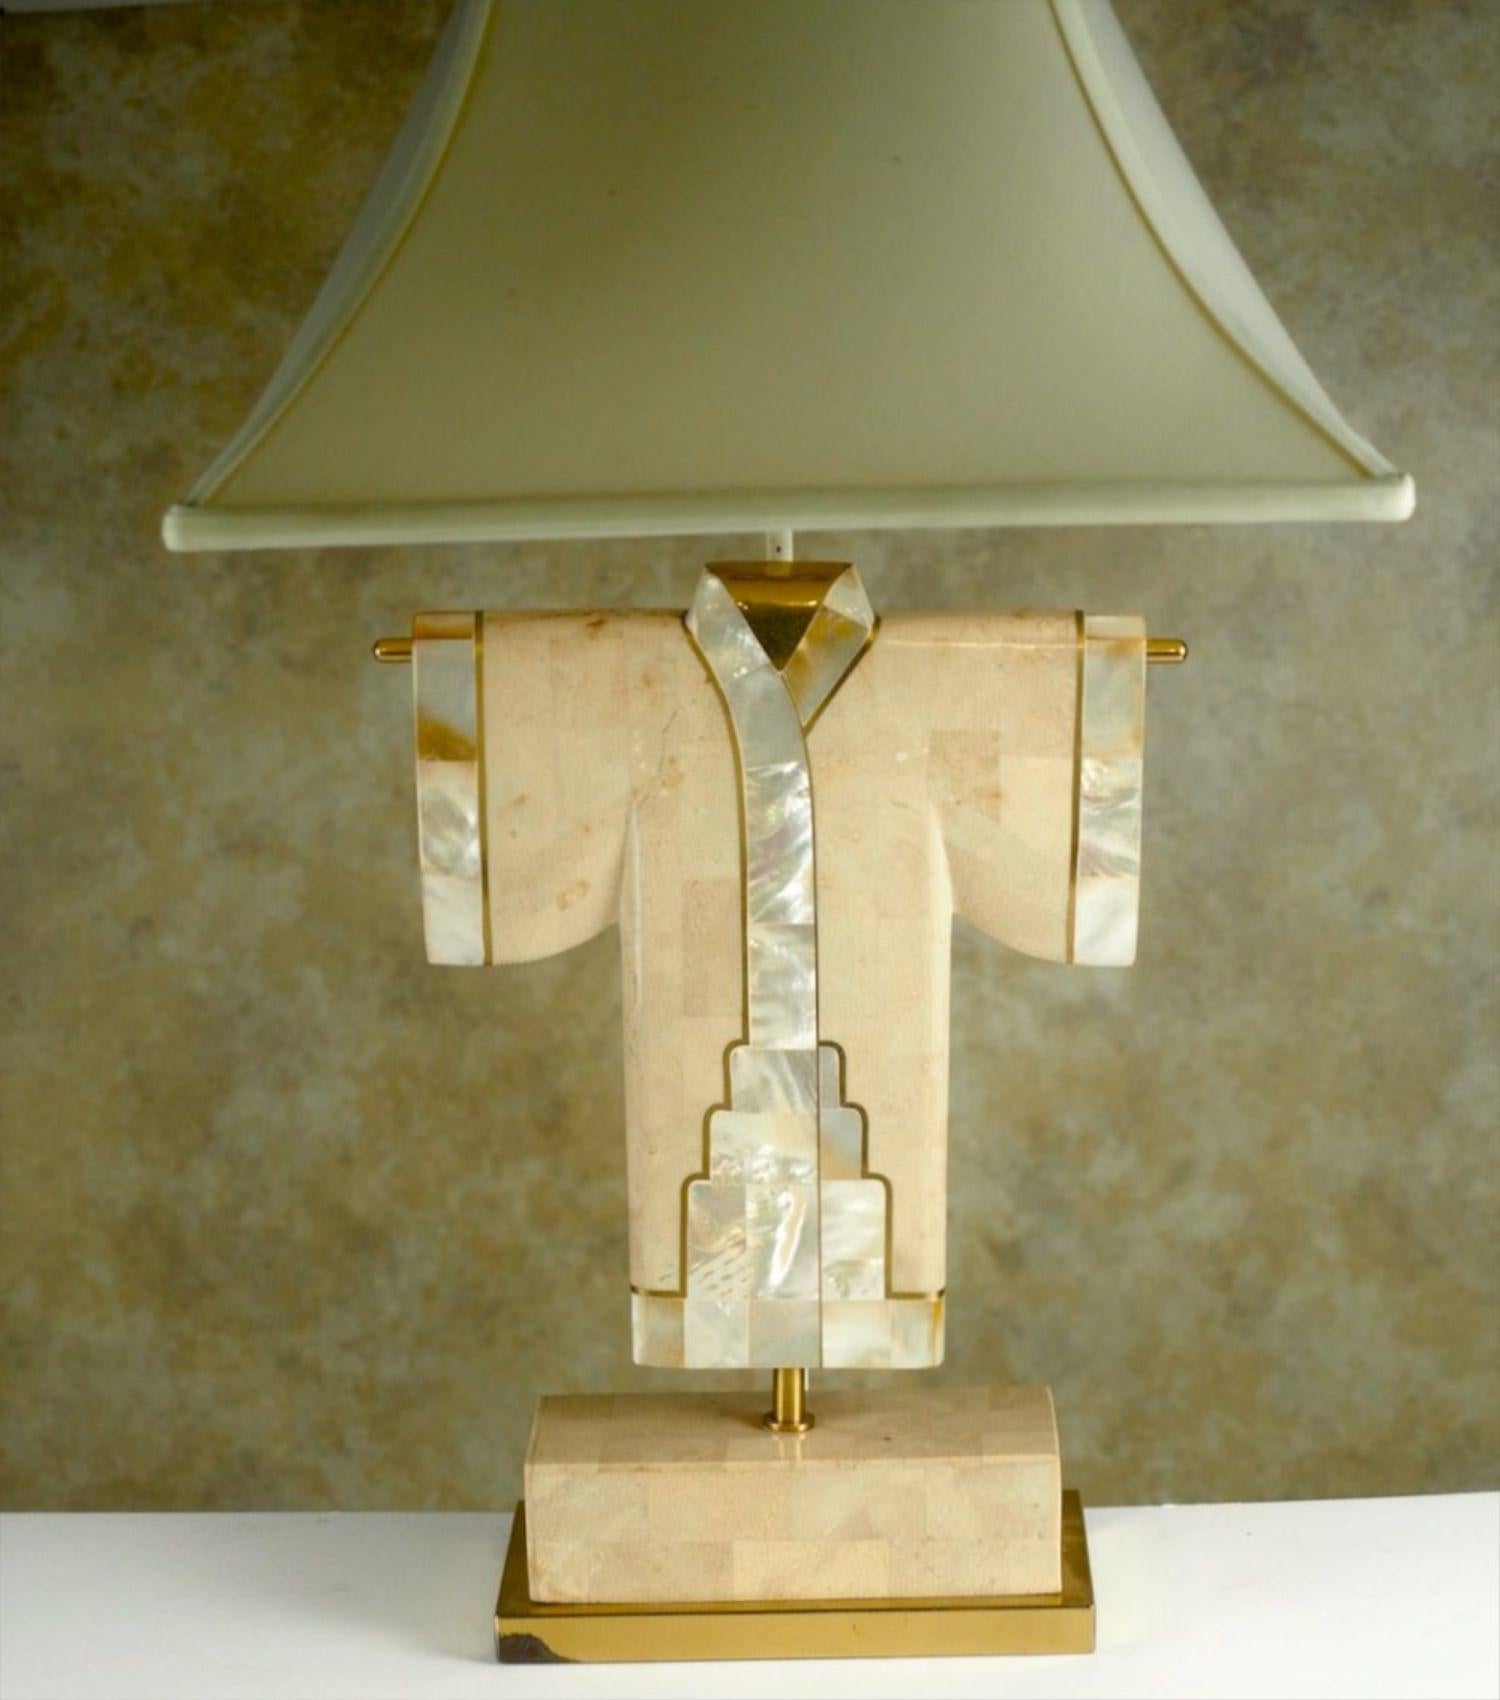 Mid-Century Modern table lamp, circa 1980, in mixed materials that include mother of pearl, brass, and tessellated stone. Measures: 28” to top of shade x 12” wide.